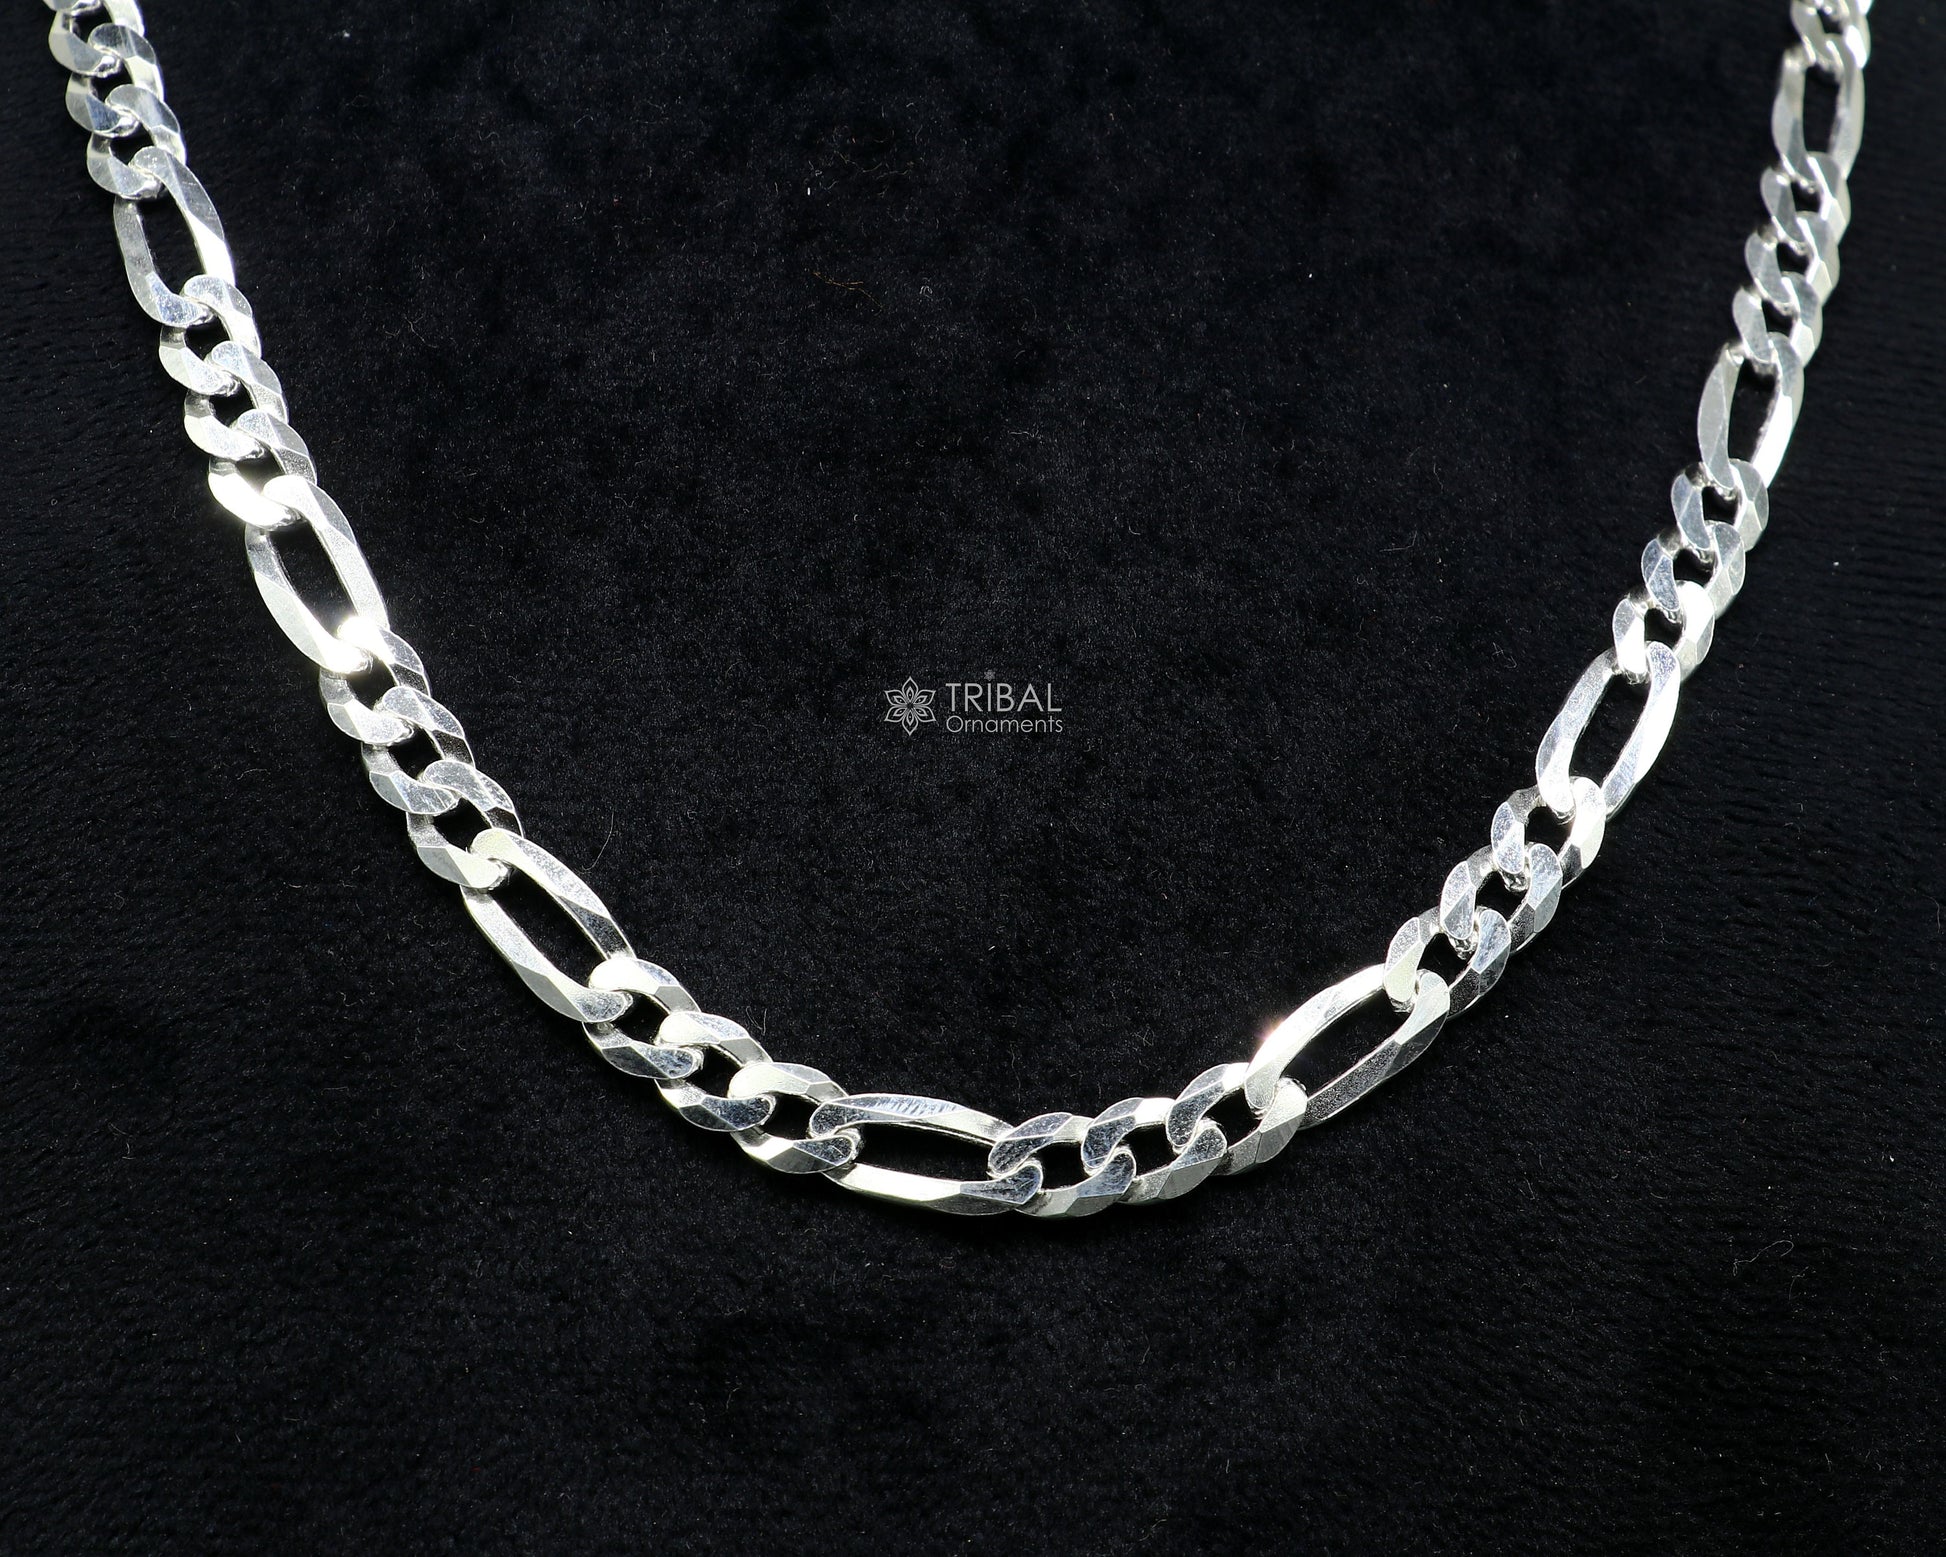 20" 7 MM 925 sterling silver handmade solid figaro chain stylish silver chain necklace, unisex chain best gifting jewelry from India ch230 - TRIBAL ORNAMENTS